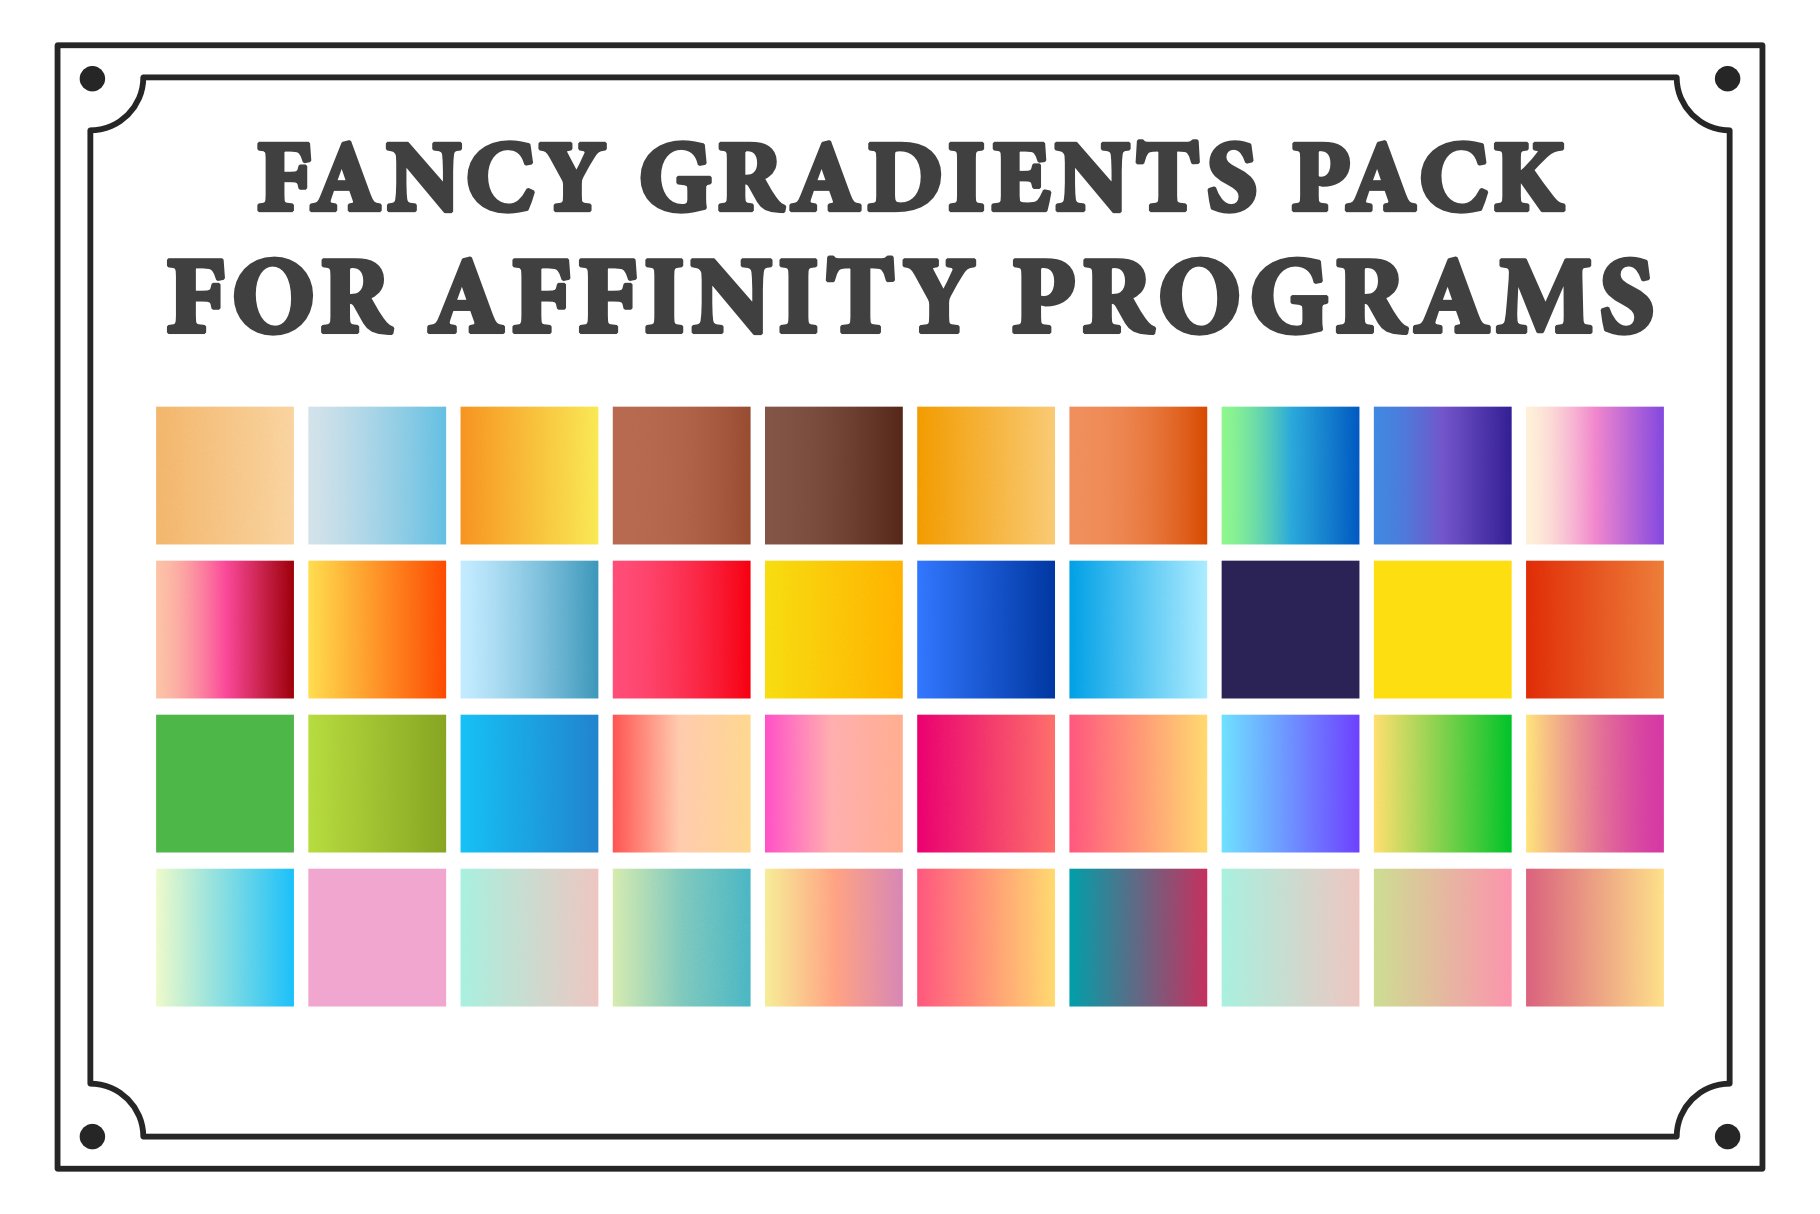 Fancy Gradient Pack For Affinity cover image.